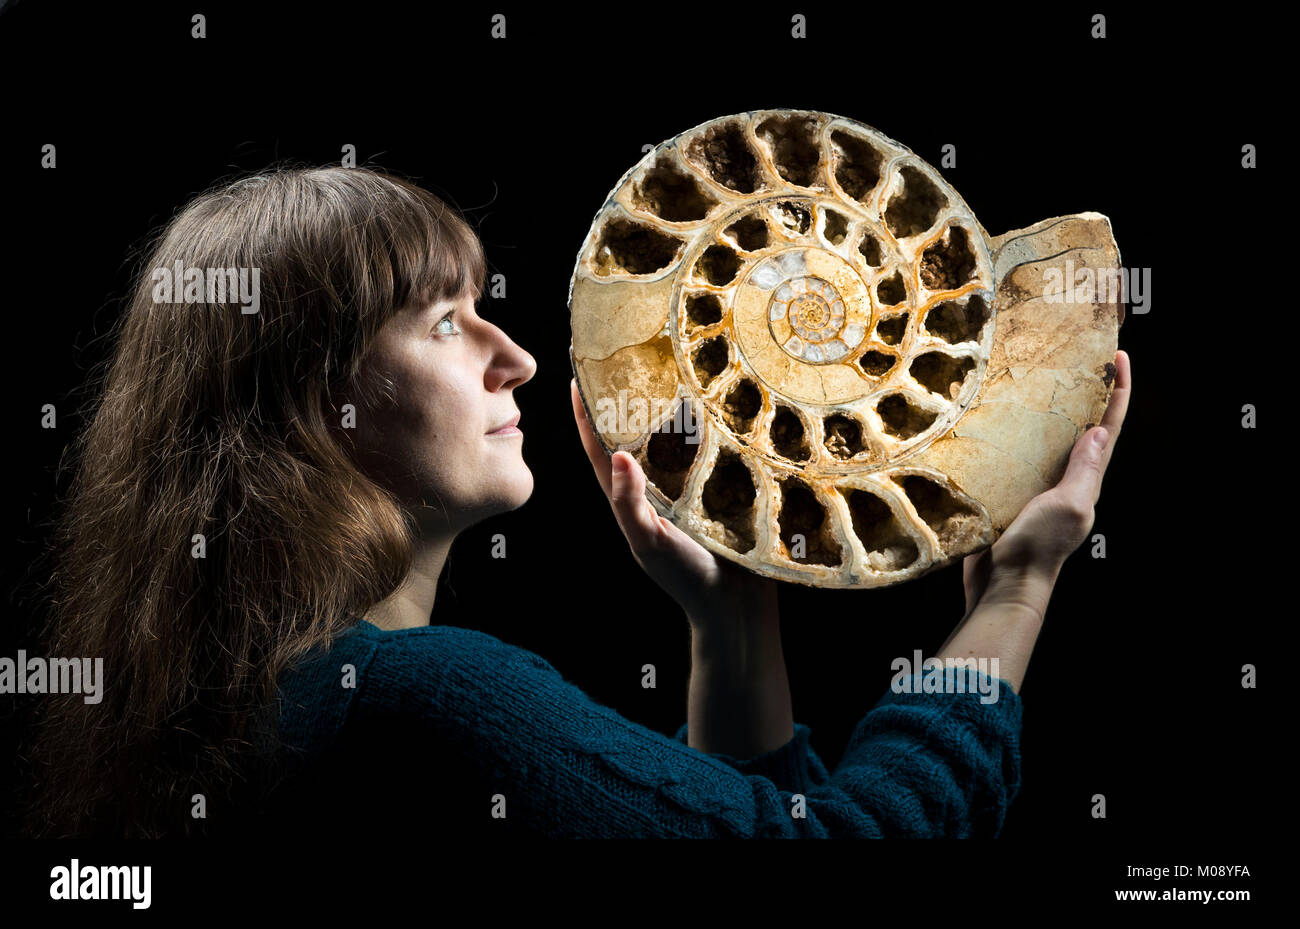 Sarah King, curator of natural science at the Yorkshire Museum in York, holds a 170 million year old ammonite fossil as she selects items ahead of the Yorkshire Museum's new Jurassic exhibition. Stock Photo